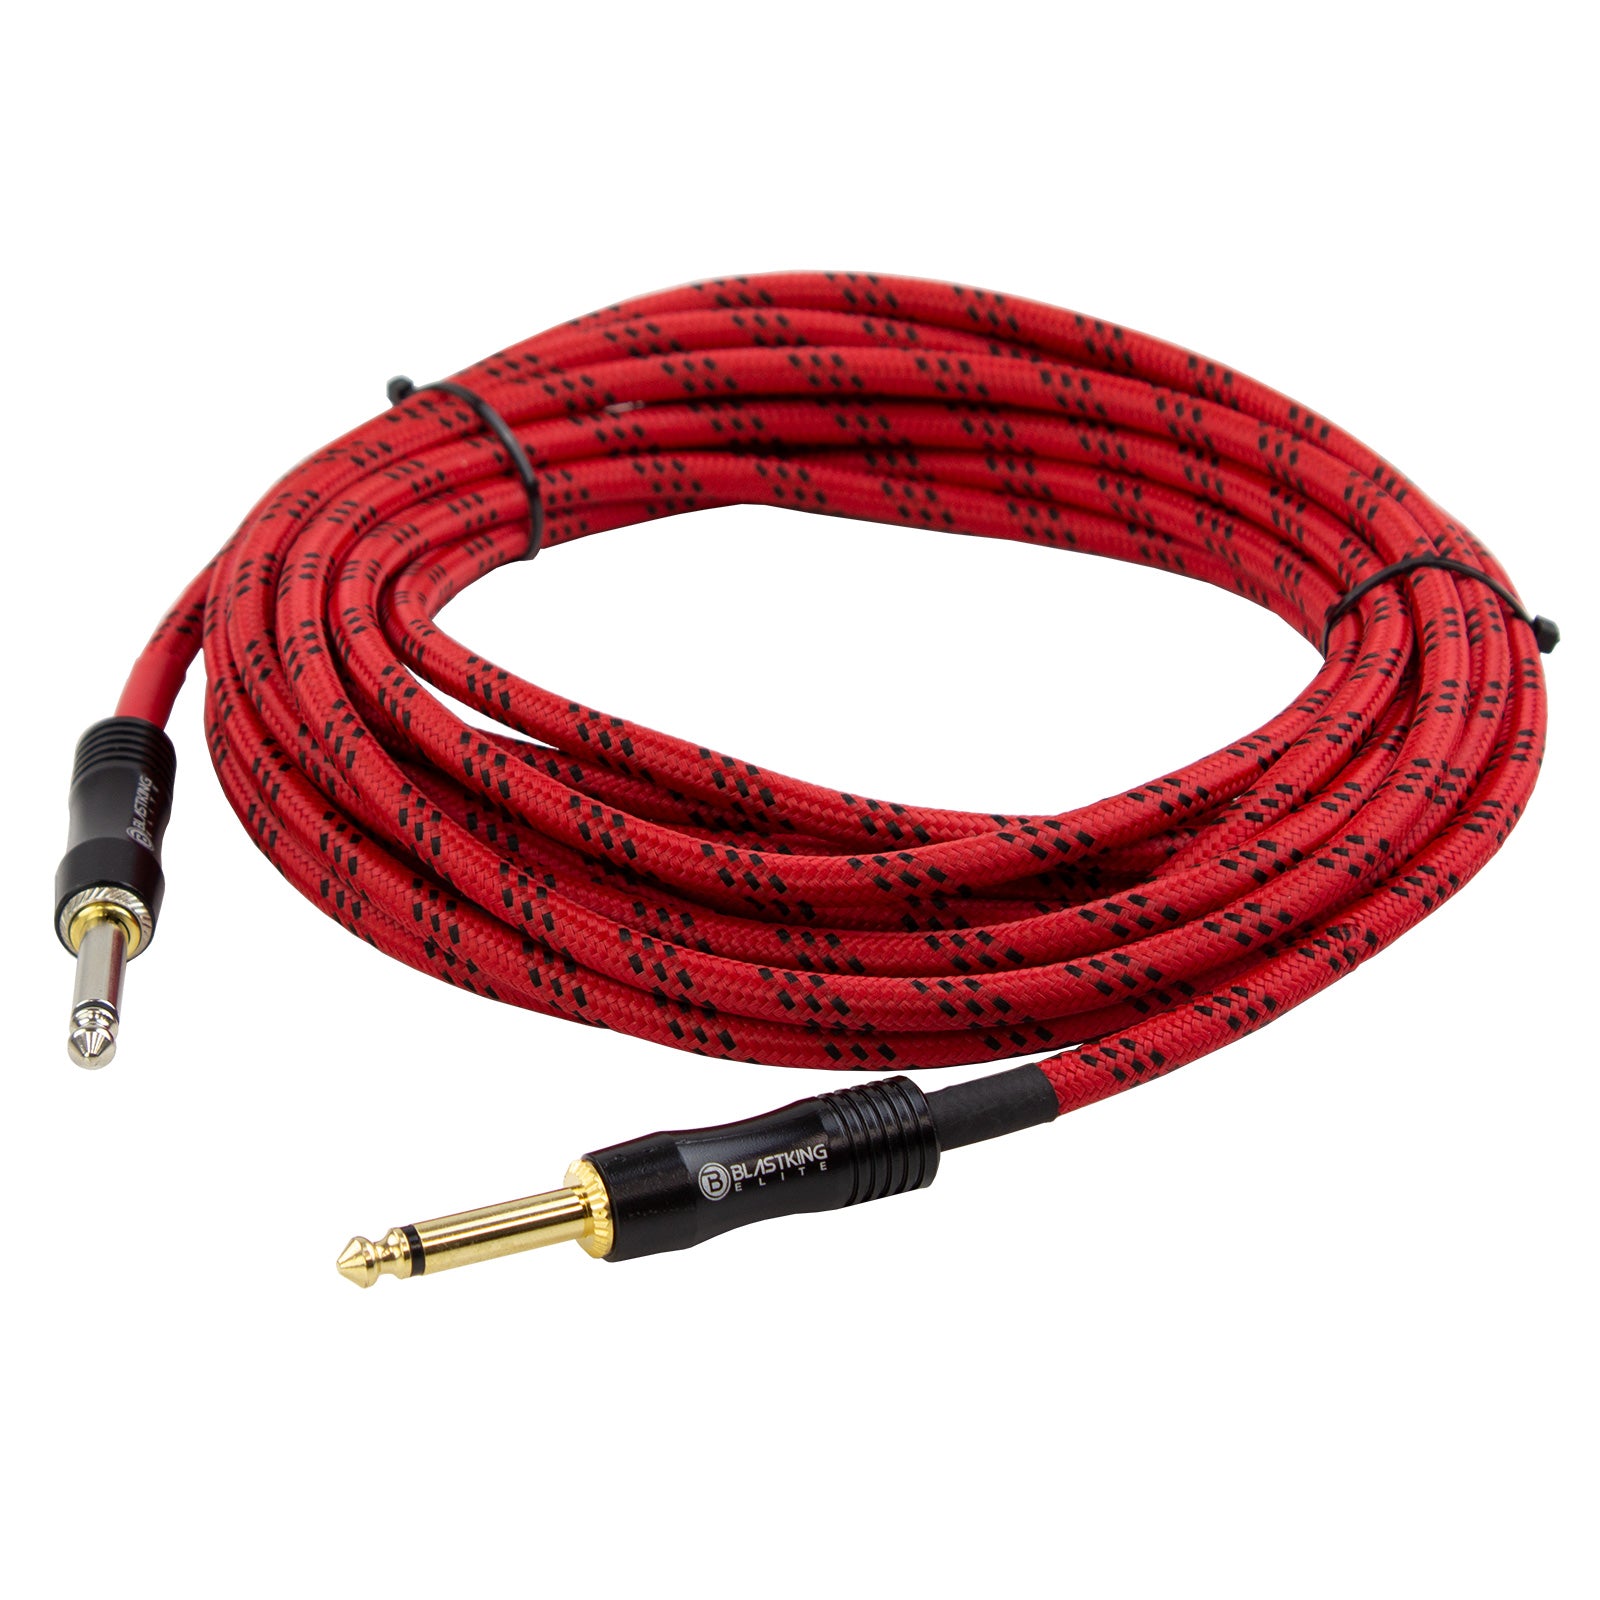 Blastking CGTR-20RB Noiseless Guitar Cable